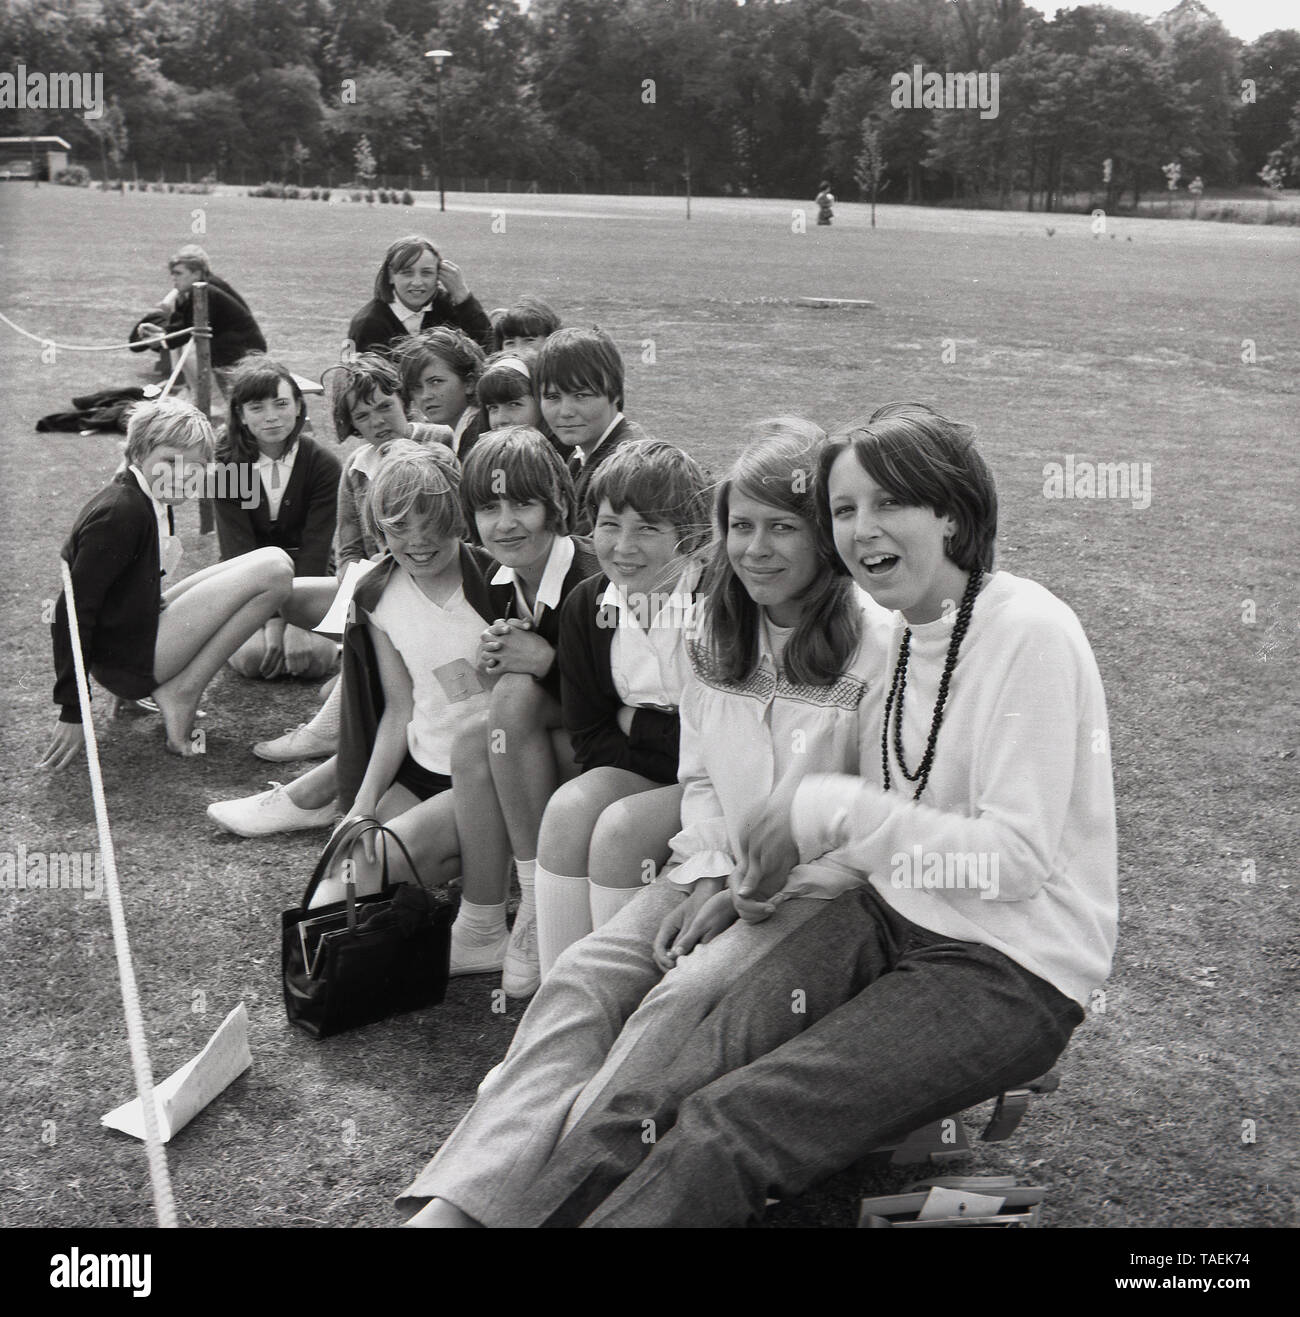 1967, historical, group of excited secondary school children sitting together outside in a field during a school sports day, England, UK. Stock Photo